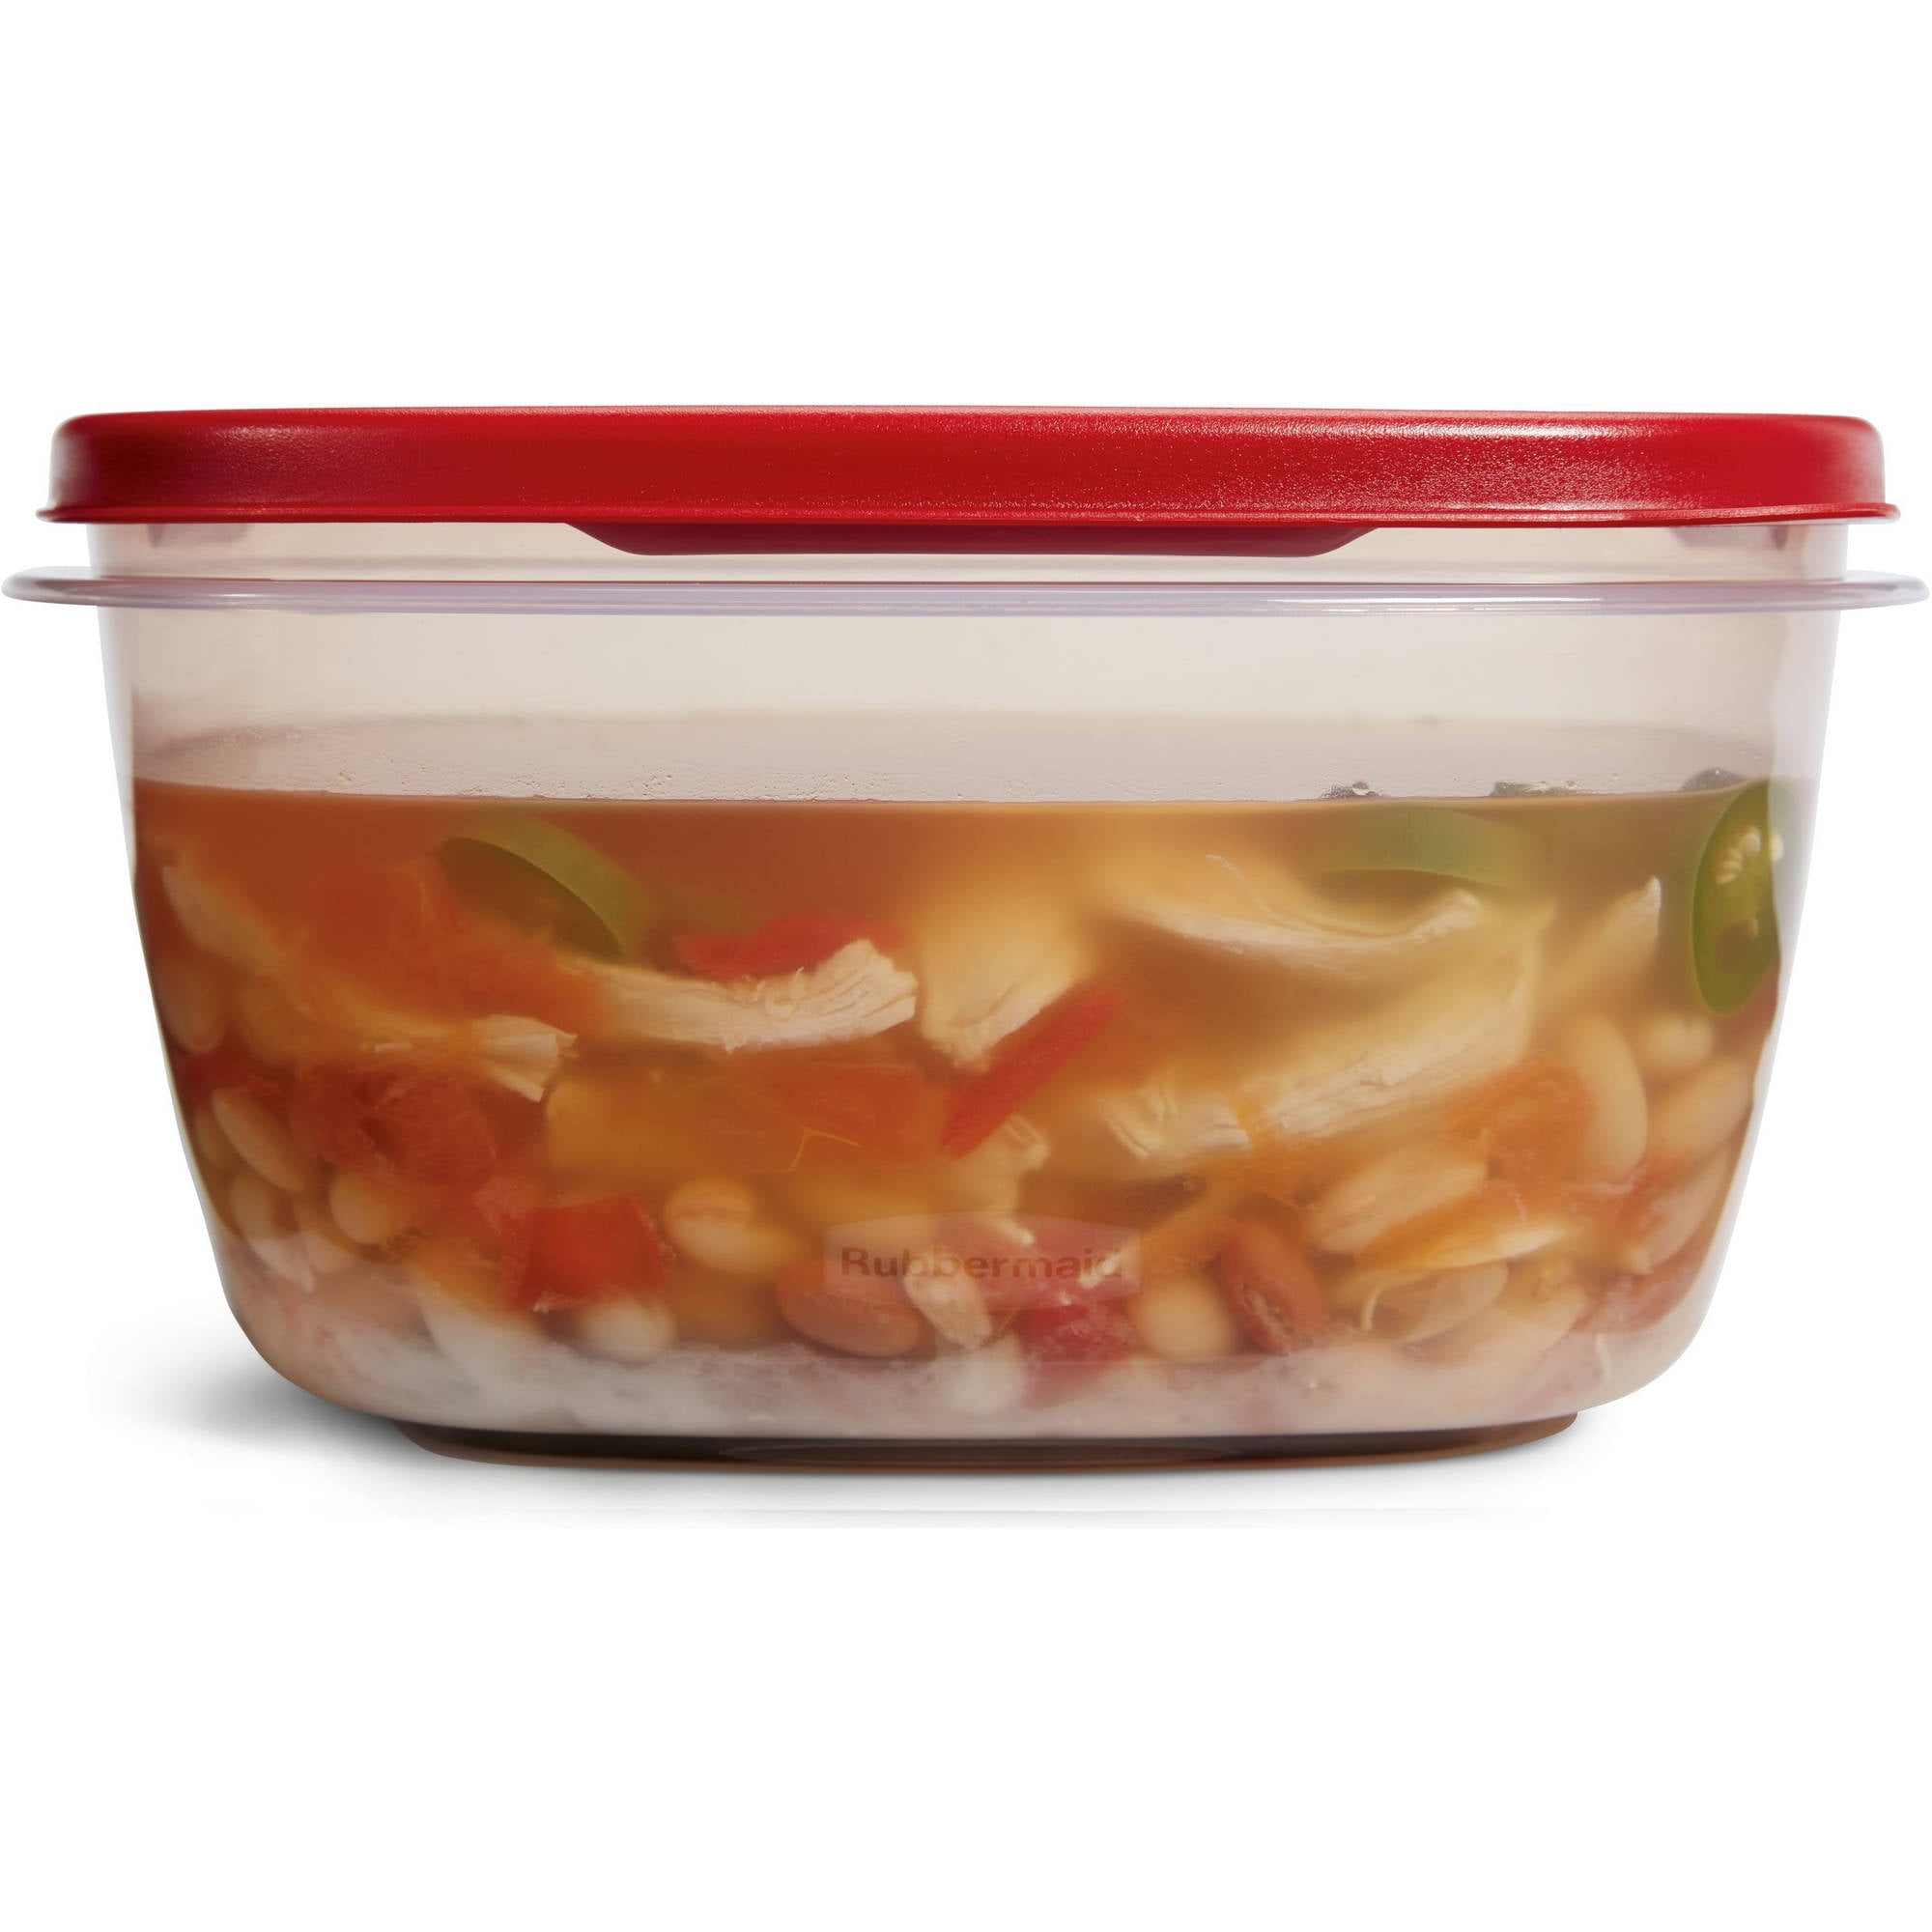 Rubbermaid food storage containers are up to 46 percent off at —today  only